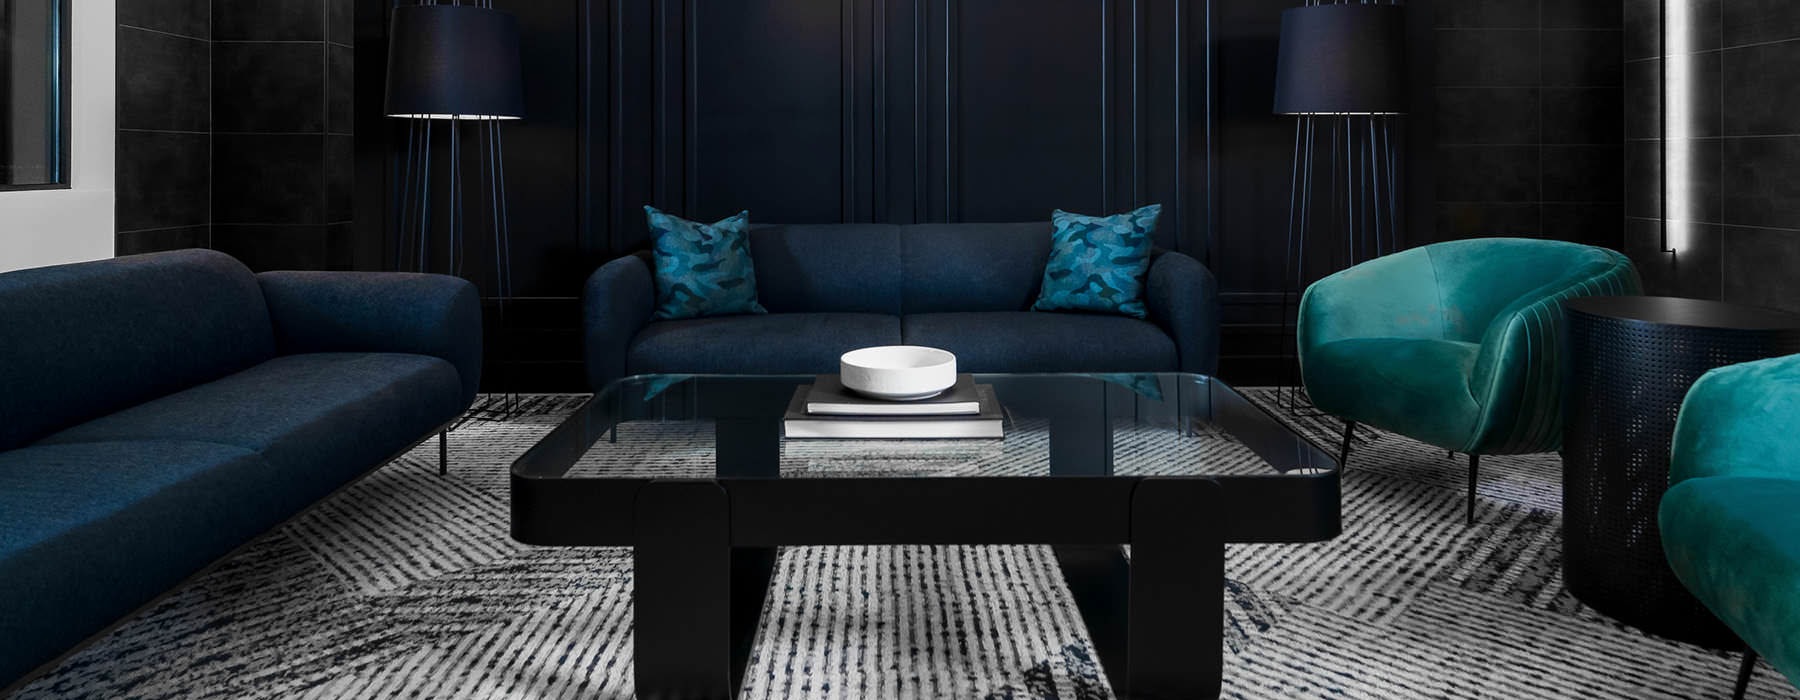 stylized lighting in dark accented lounge